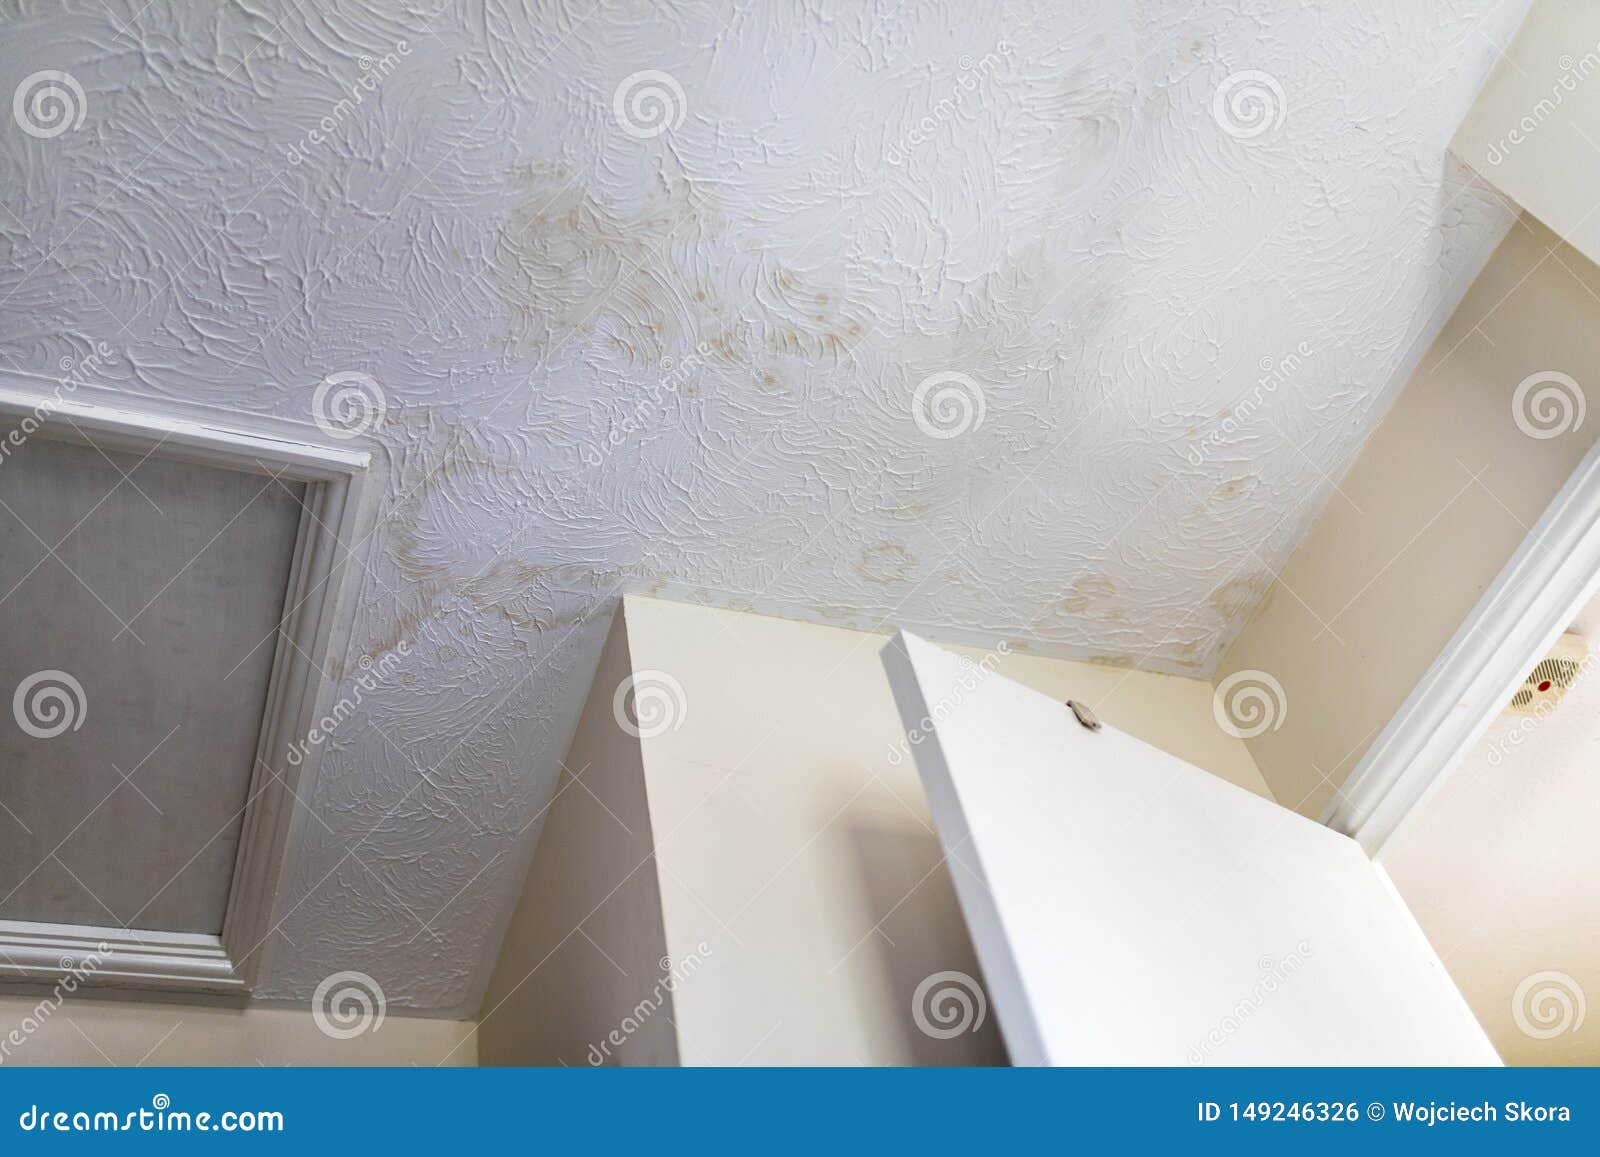 Stains On The Ceiling After Water Leakage Humidity On Wall Stock